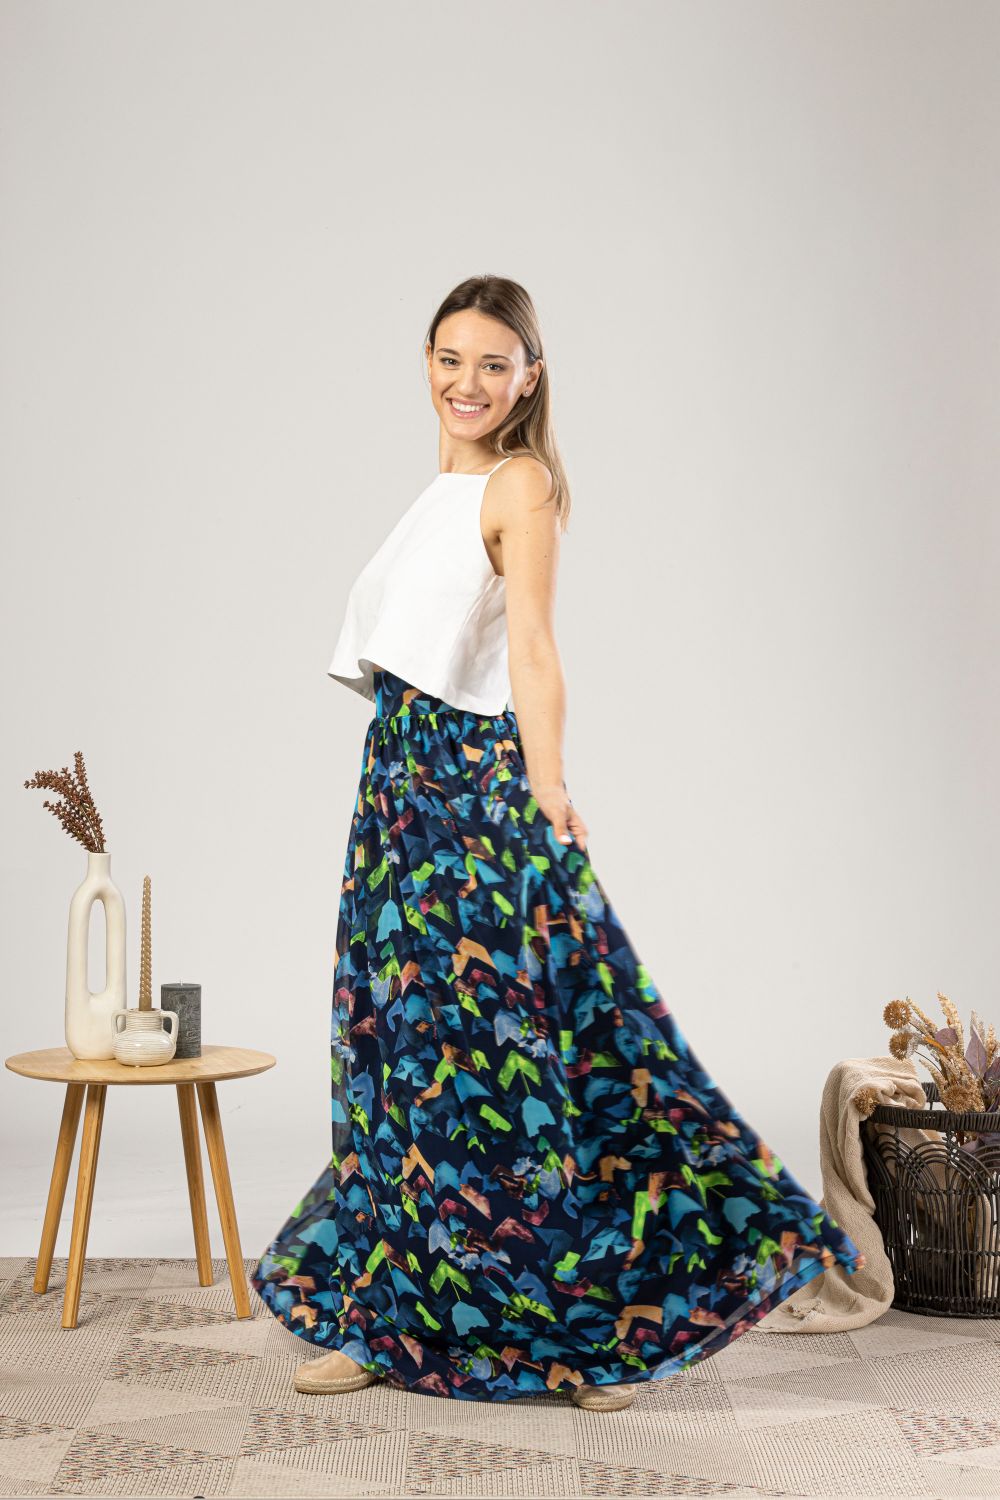 Extravagant Colorful Chiffon Skirt for casual summer outfits - from NikkaPlace | Effortless fashion for easy living